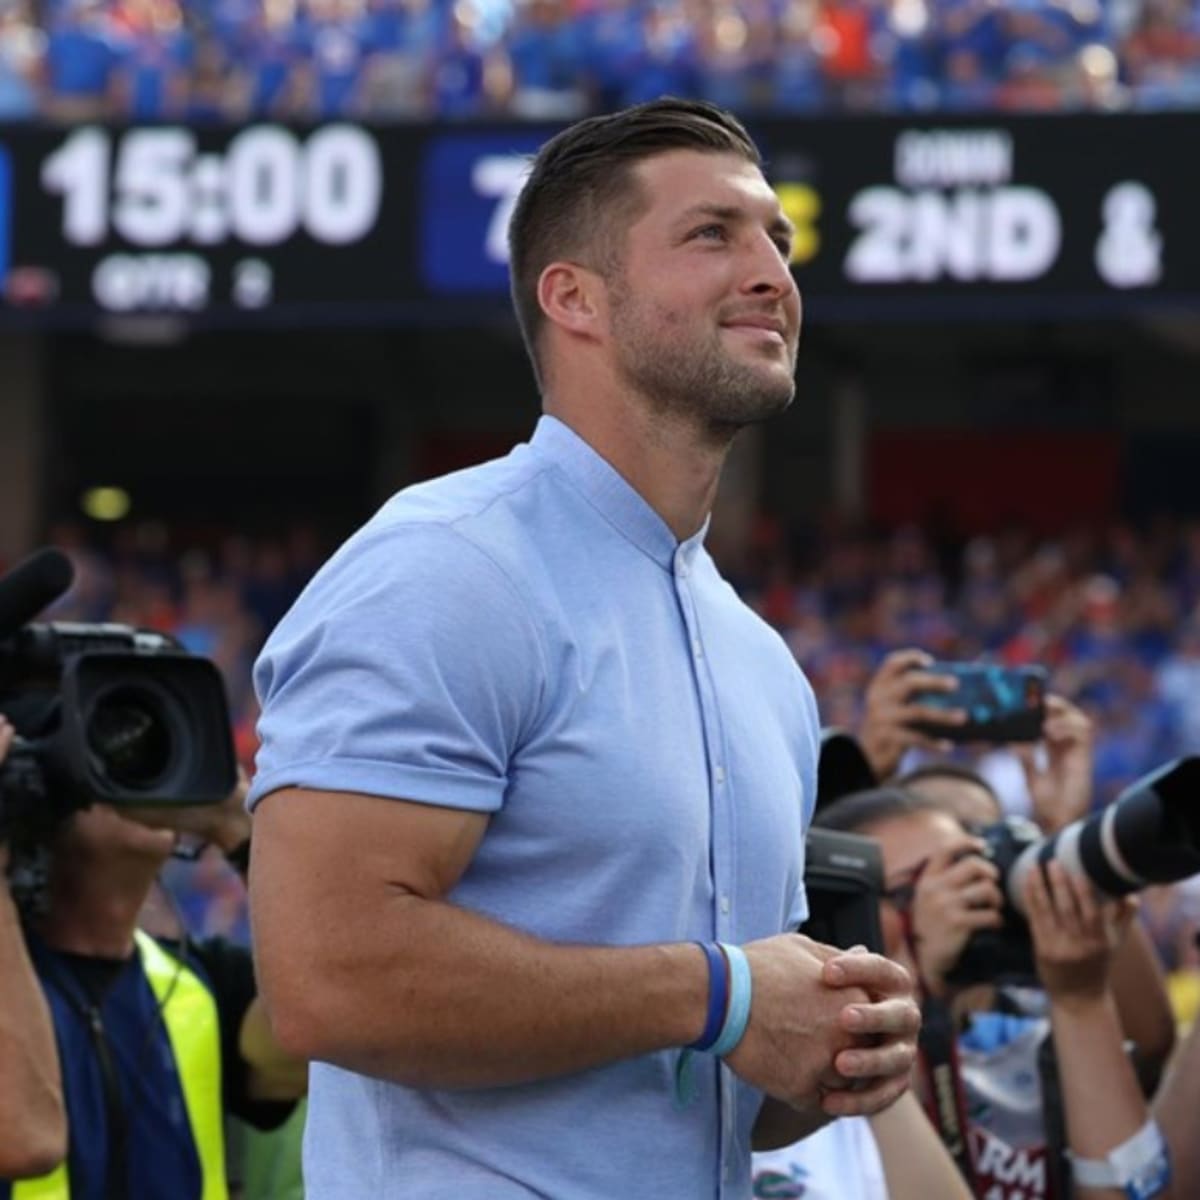 Tim Tebow's muscles have reached epic proportions